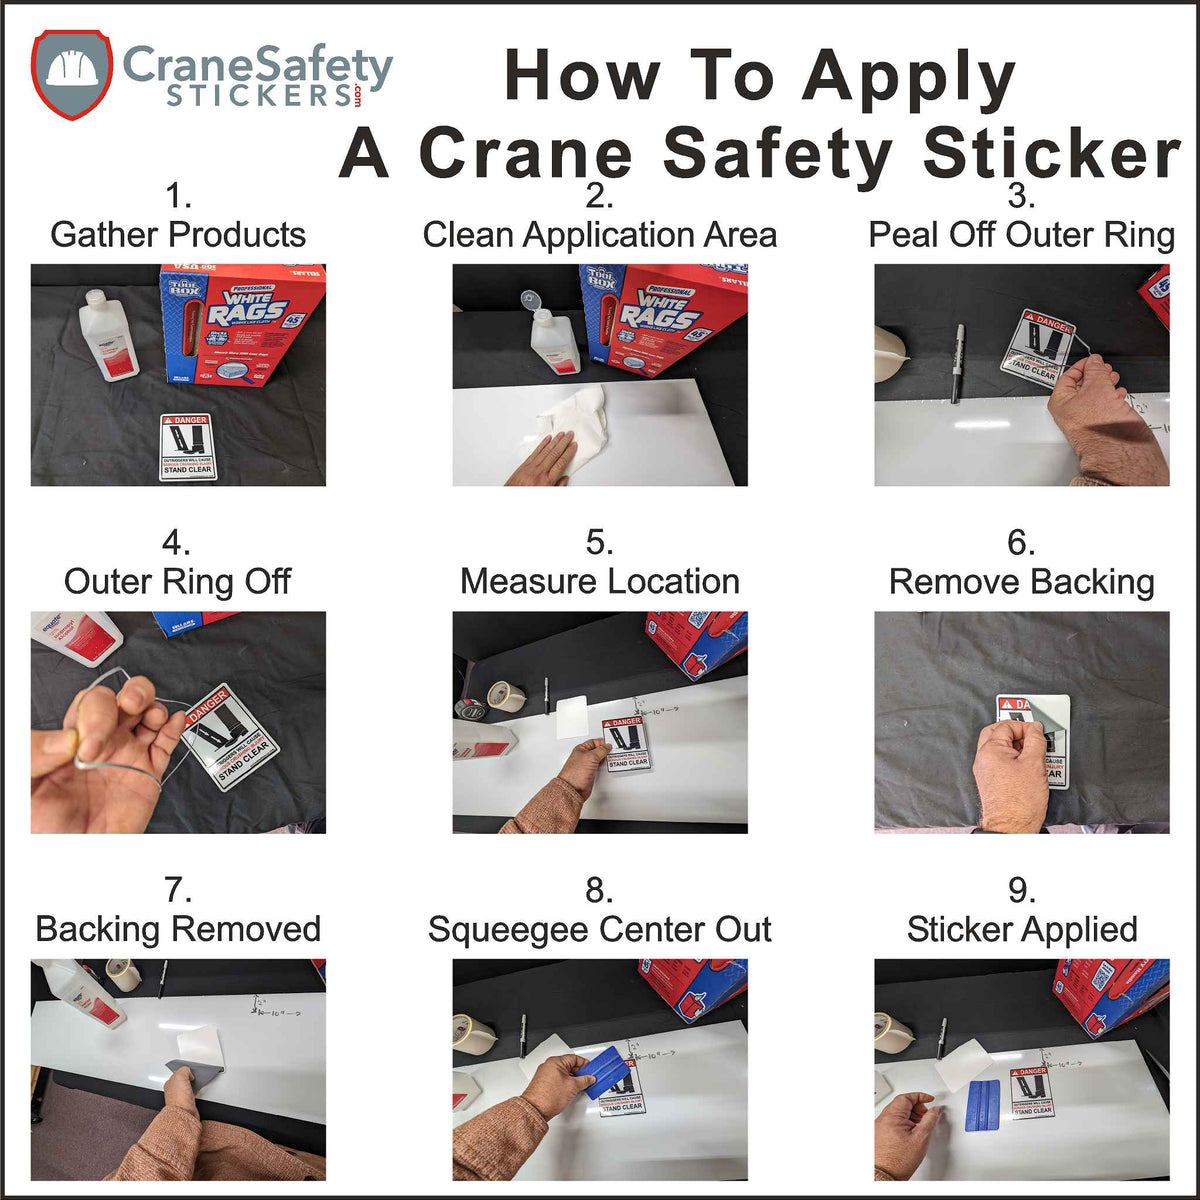 Directions on How To Apply Our Spanish Crane Safety Stickers Outrigger Beams Must Be Pinned For Travel.